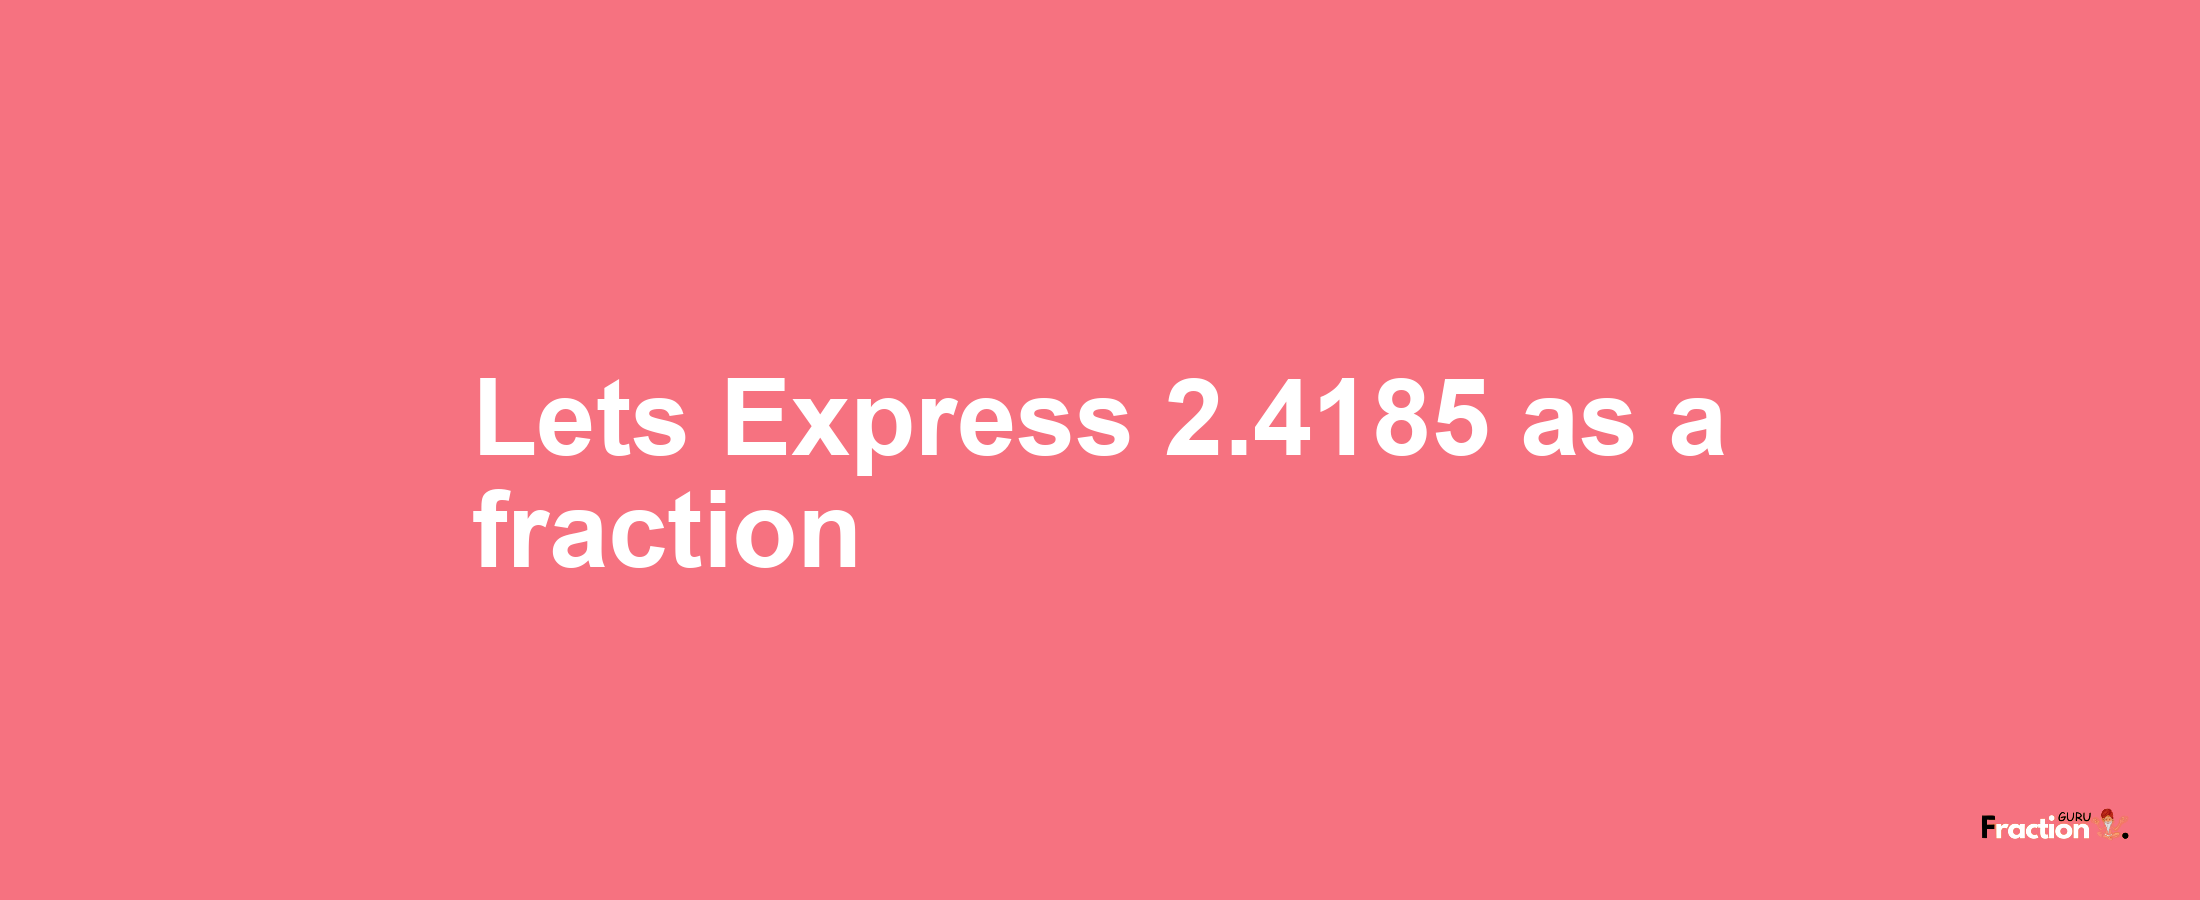 Lets Express 2.4185 as afraction